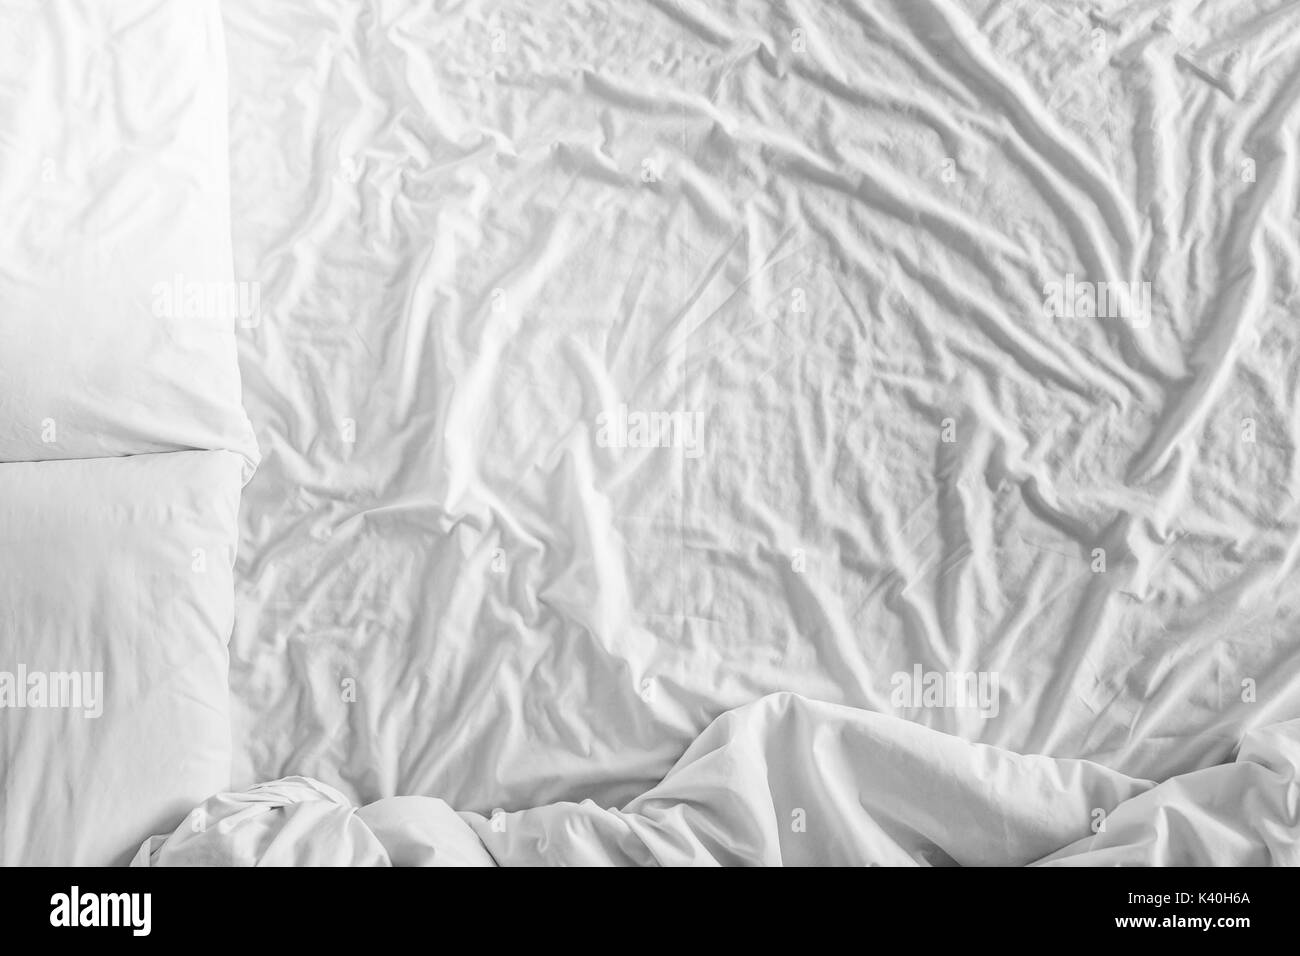 Top view bed with crumpled bed sheet, a blanket and pillows after comfort duvet sleep waking up in the morning Stock Photo